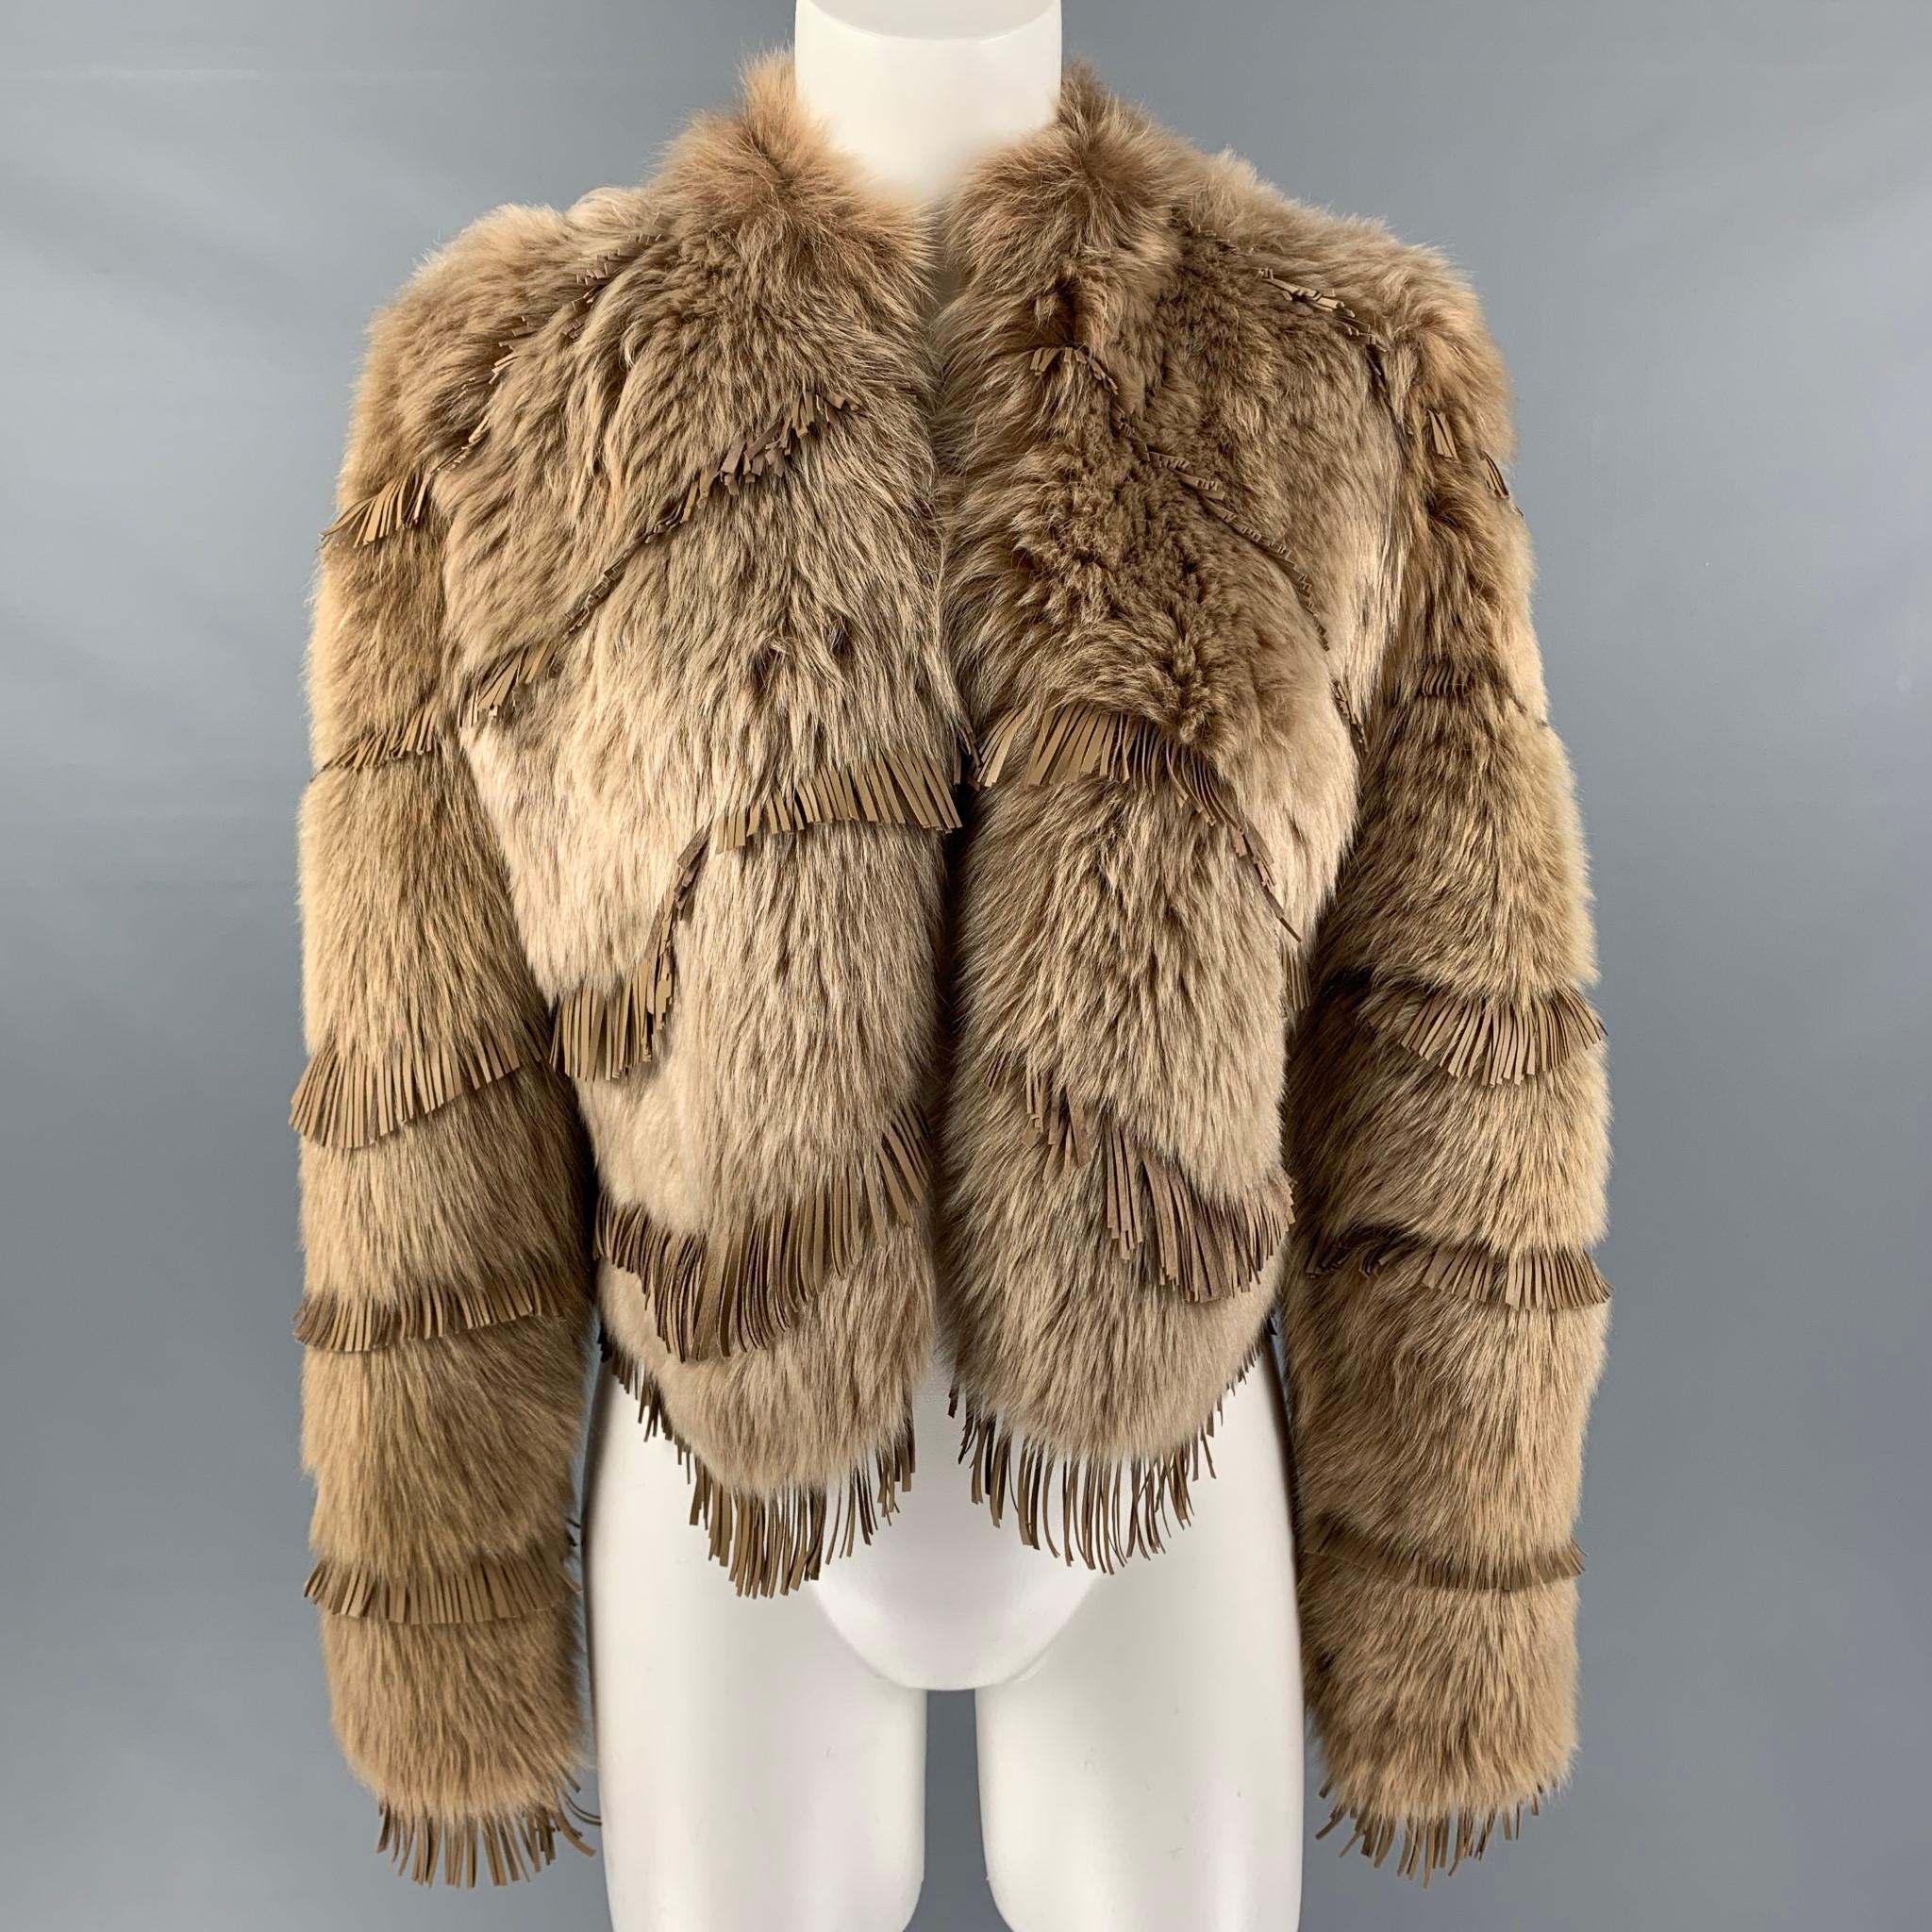 RALPH LAUREN 'COLLECTION' cropped jacket comes in a tan lamb shearling fur with a lamb leather lining featuring leather fringe details, and hook and eye closure. Made in Italy.

Excellent Pre-Owned Condition.
Marked: 4

Measurements:

Shoulder: 16